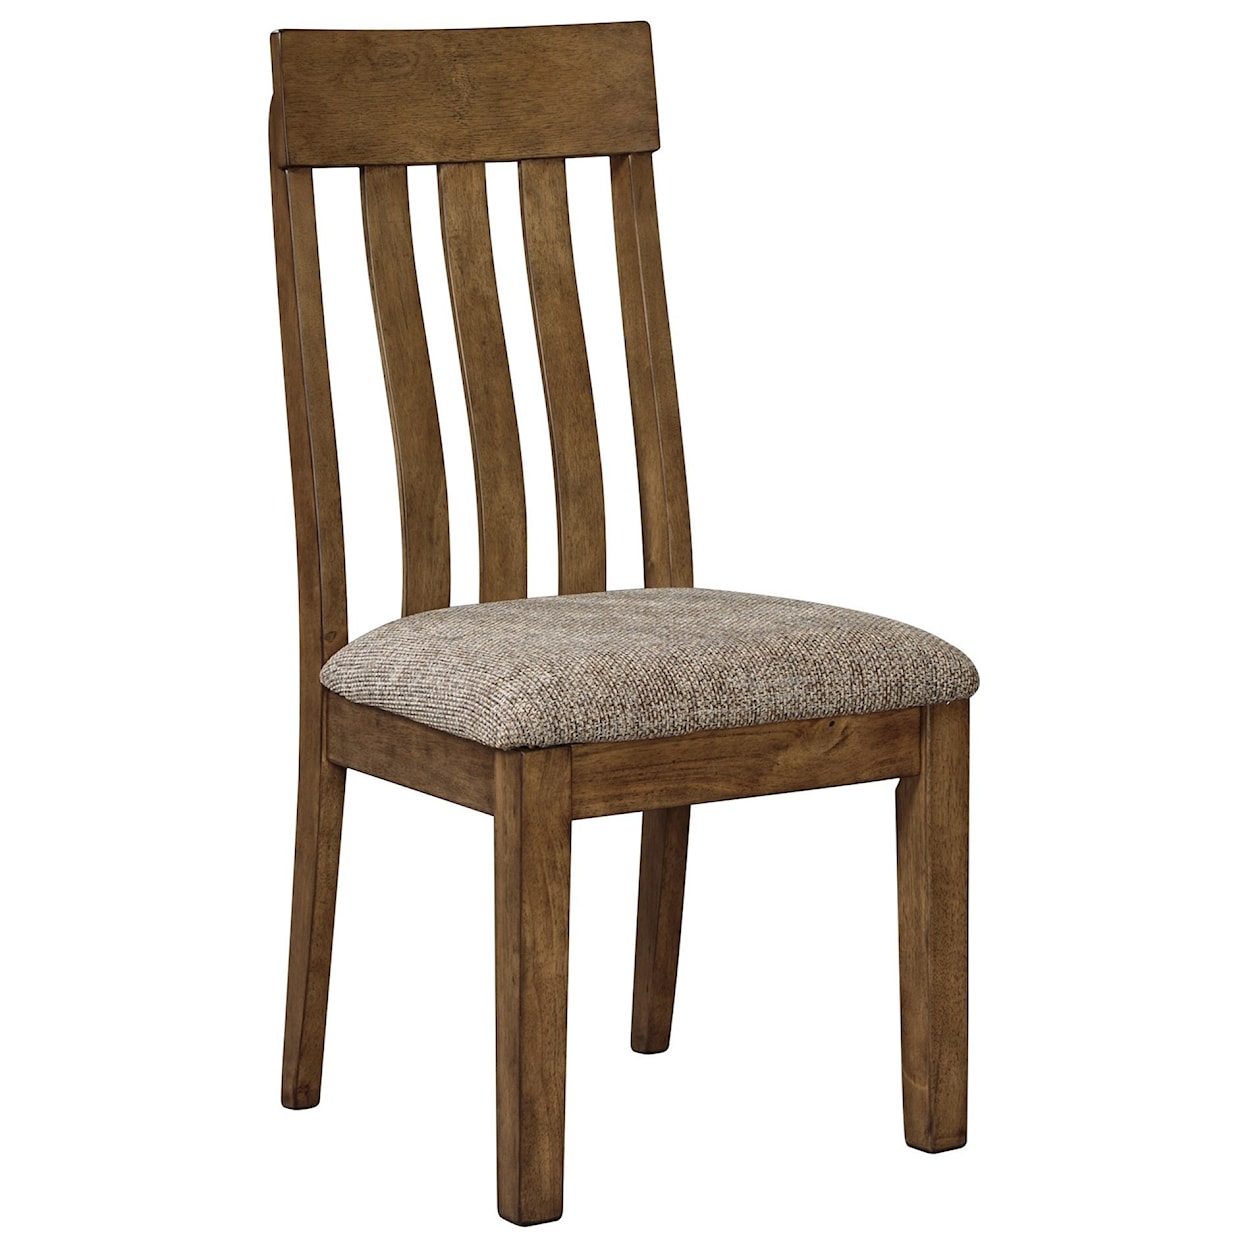 Benchcraft Flaybern Dining Upholstered Side Chair